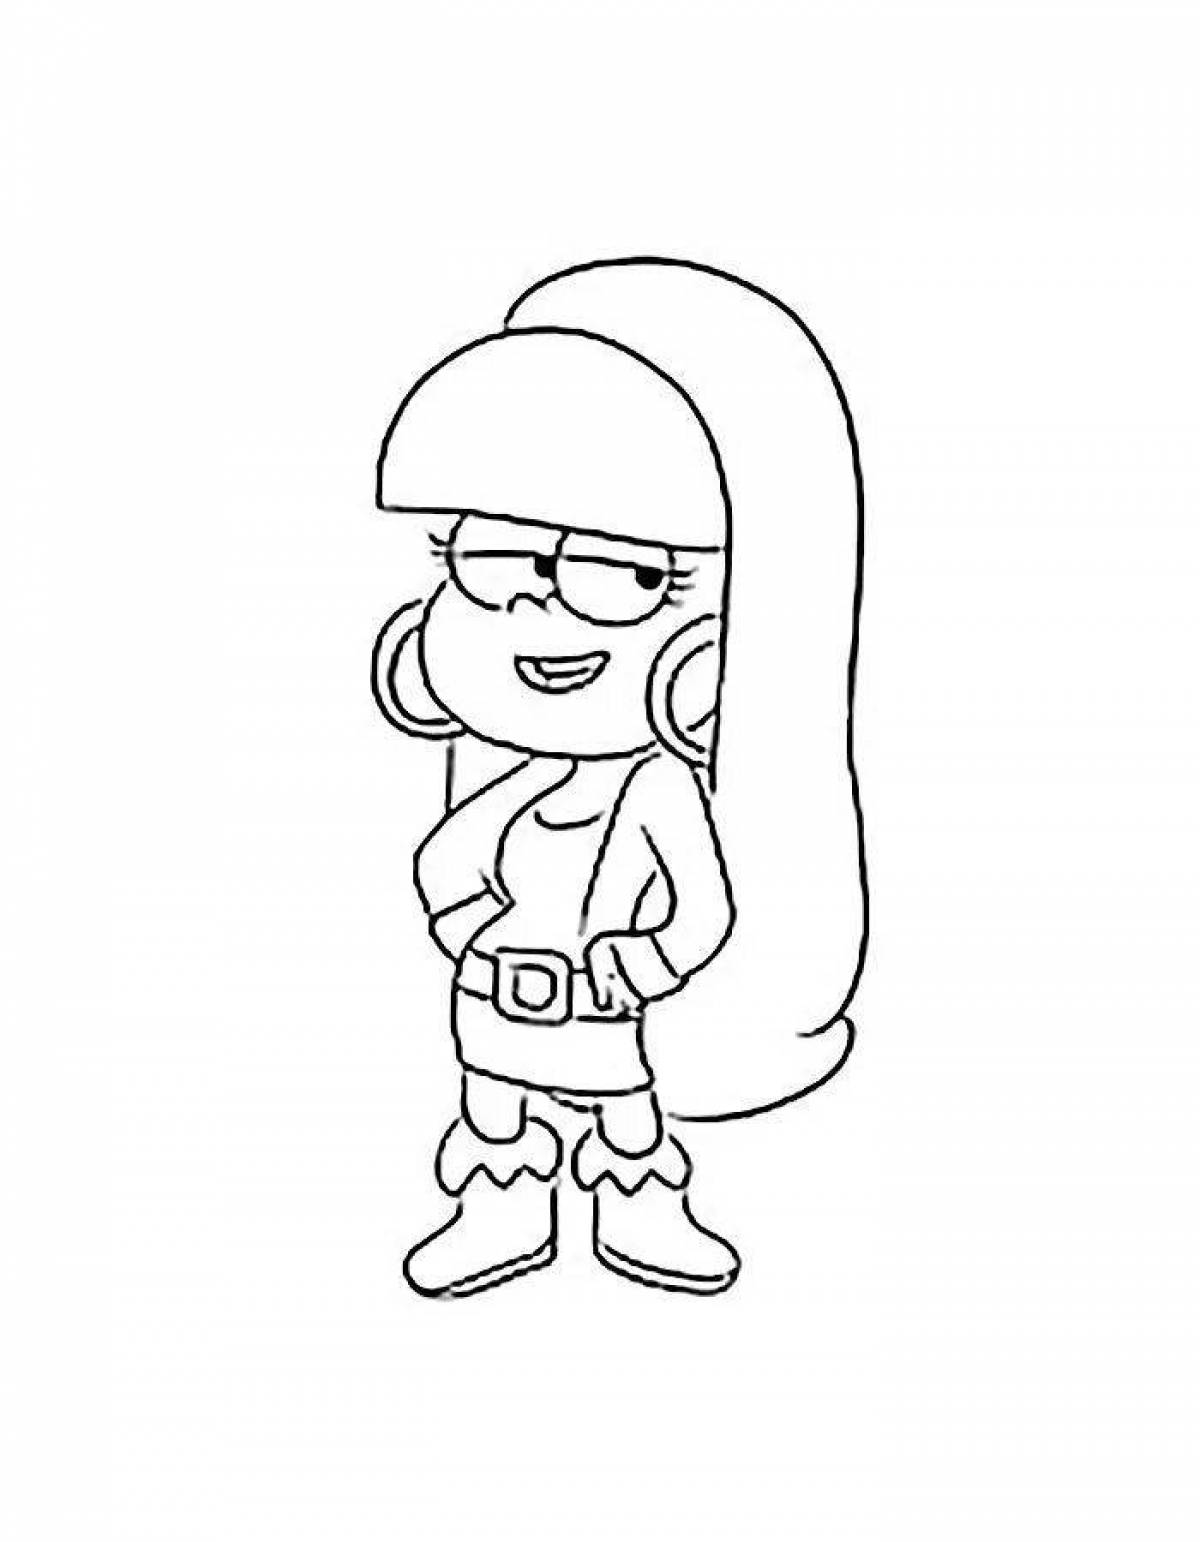 Mabel and dipper's fancy coloring book